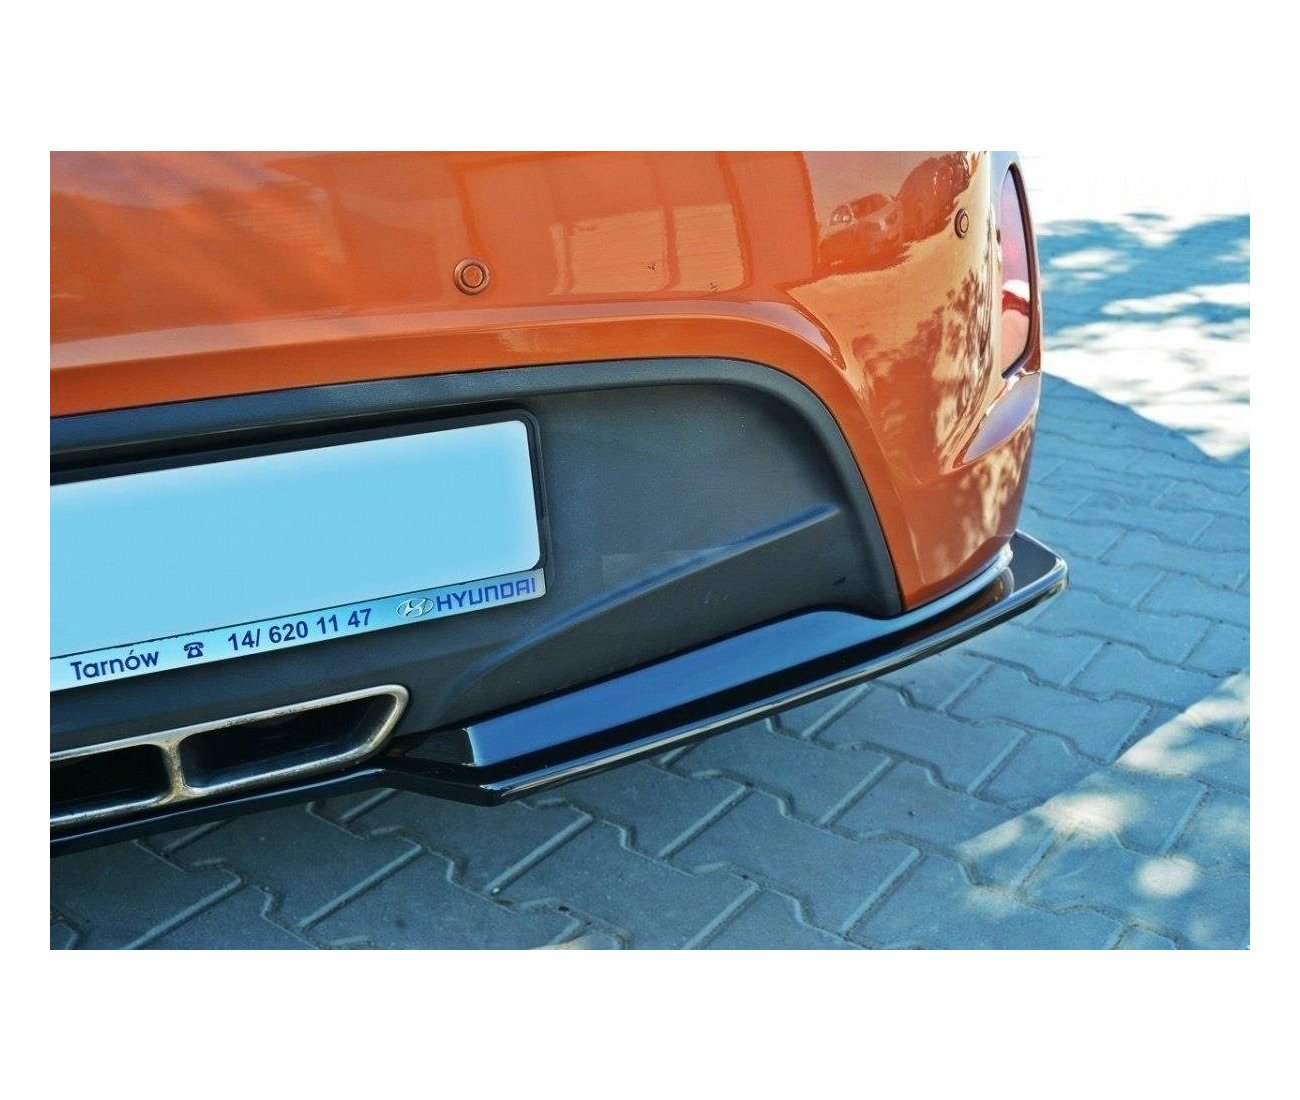 Cup diffuser rear approach for Hyundai Veloster